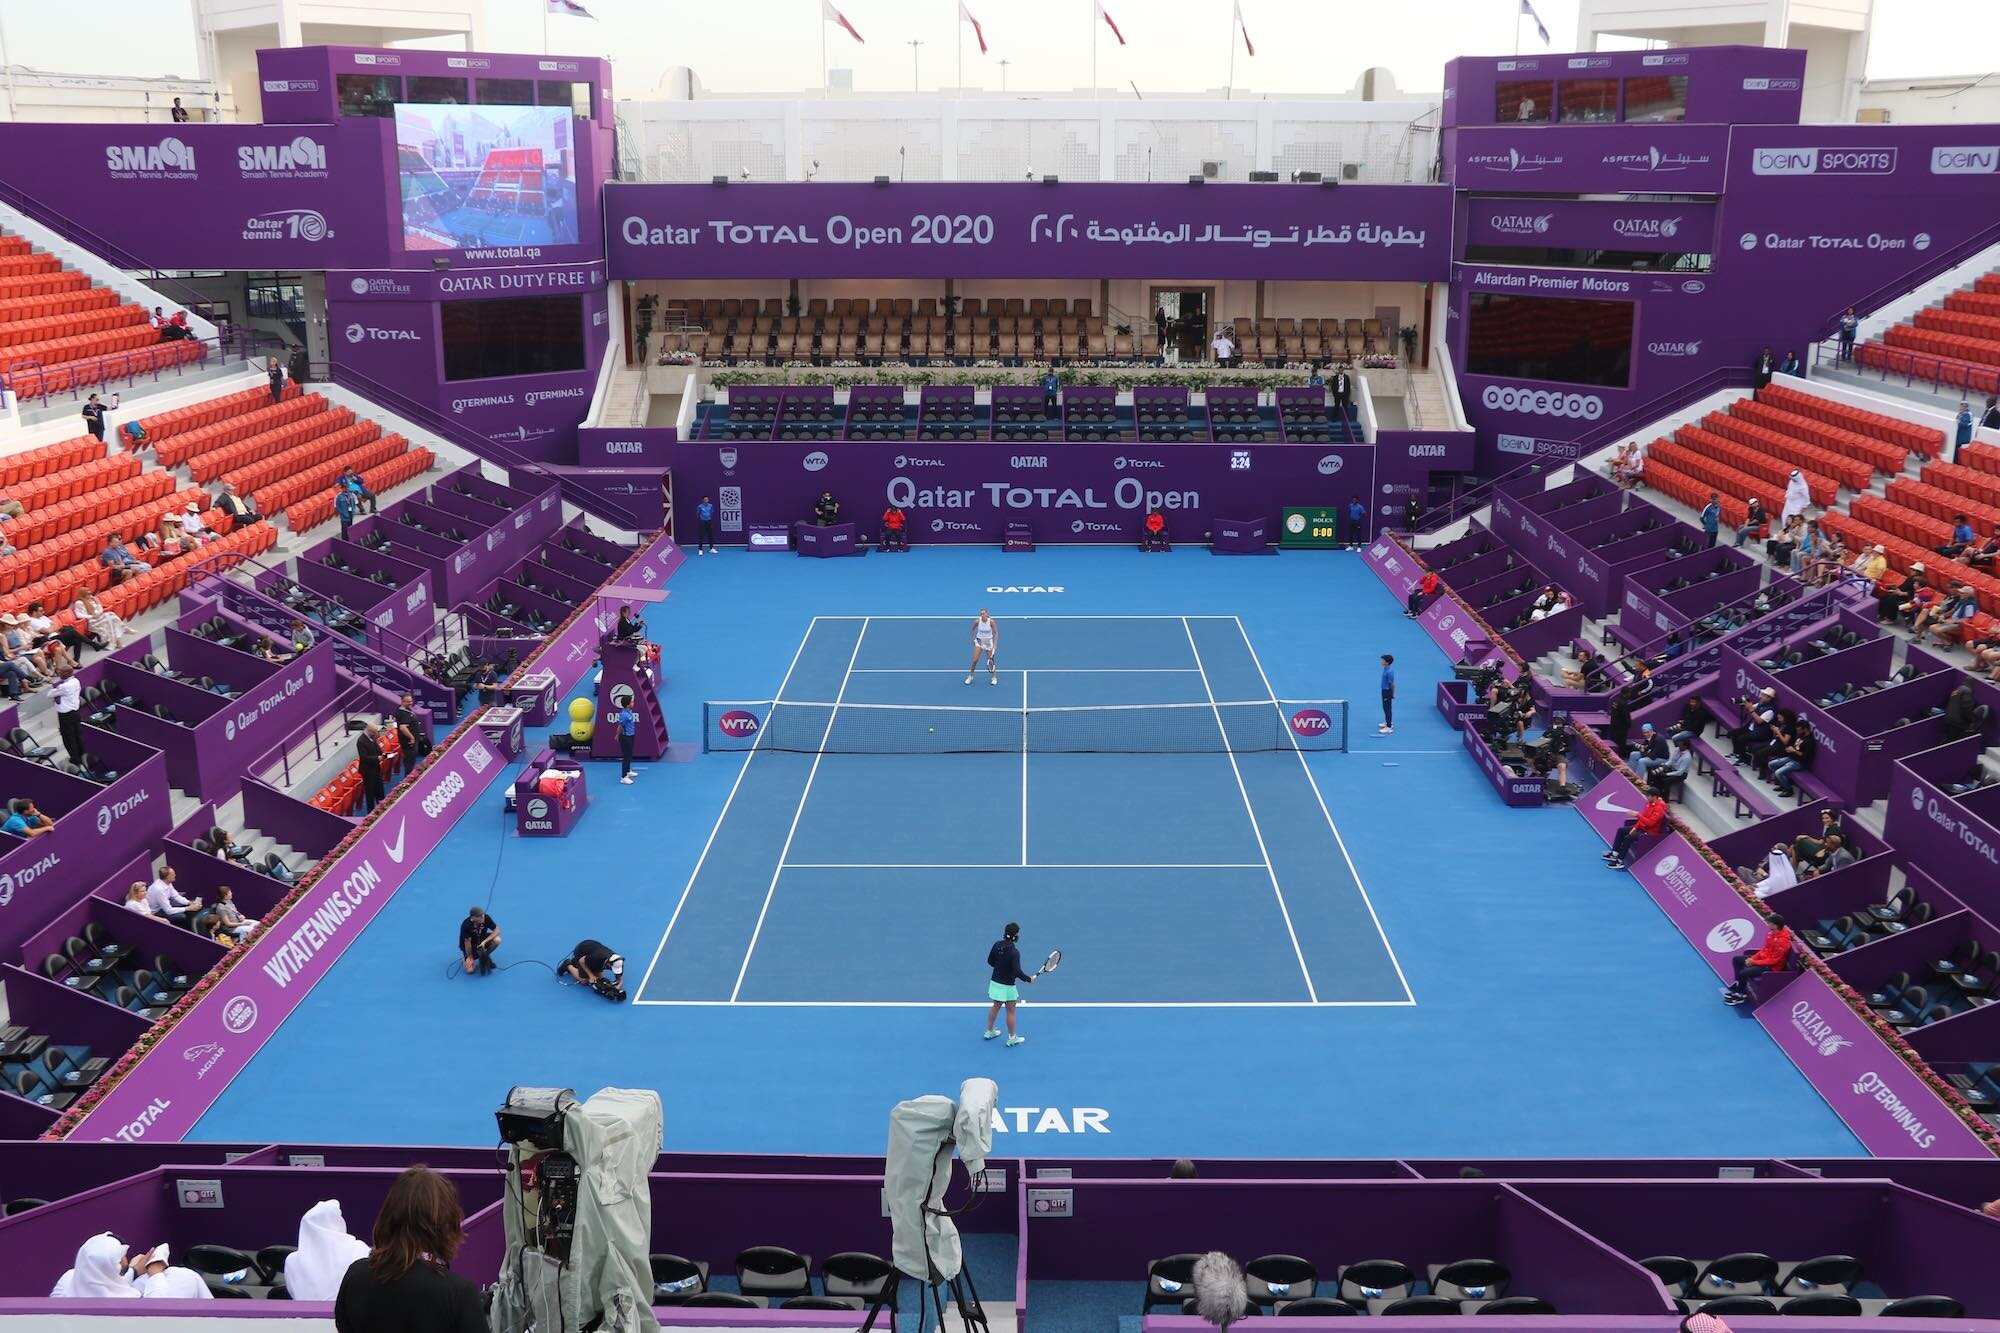 20-facts-about-qatar-total-open-tennis